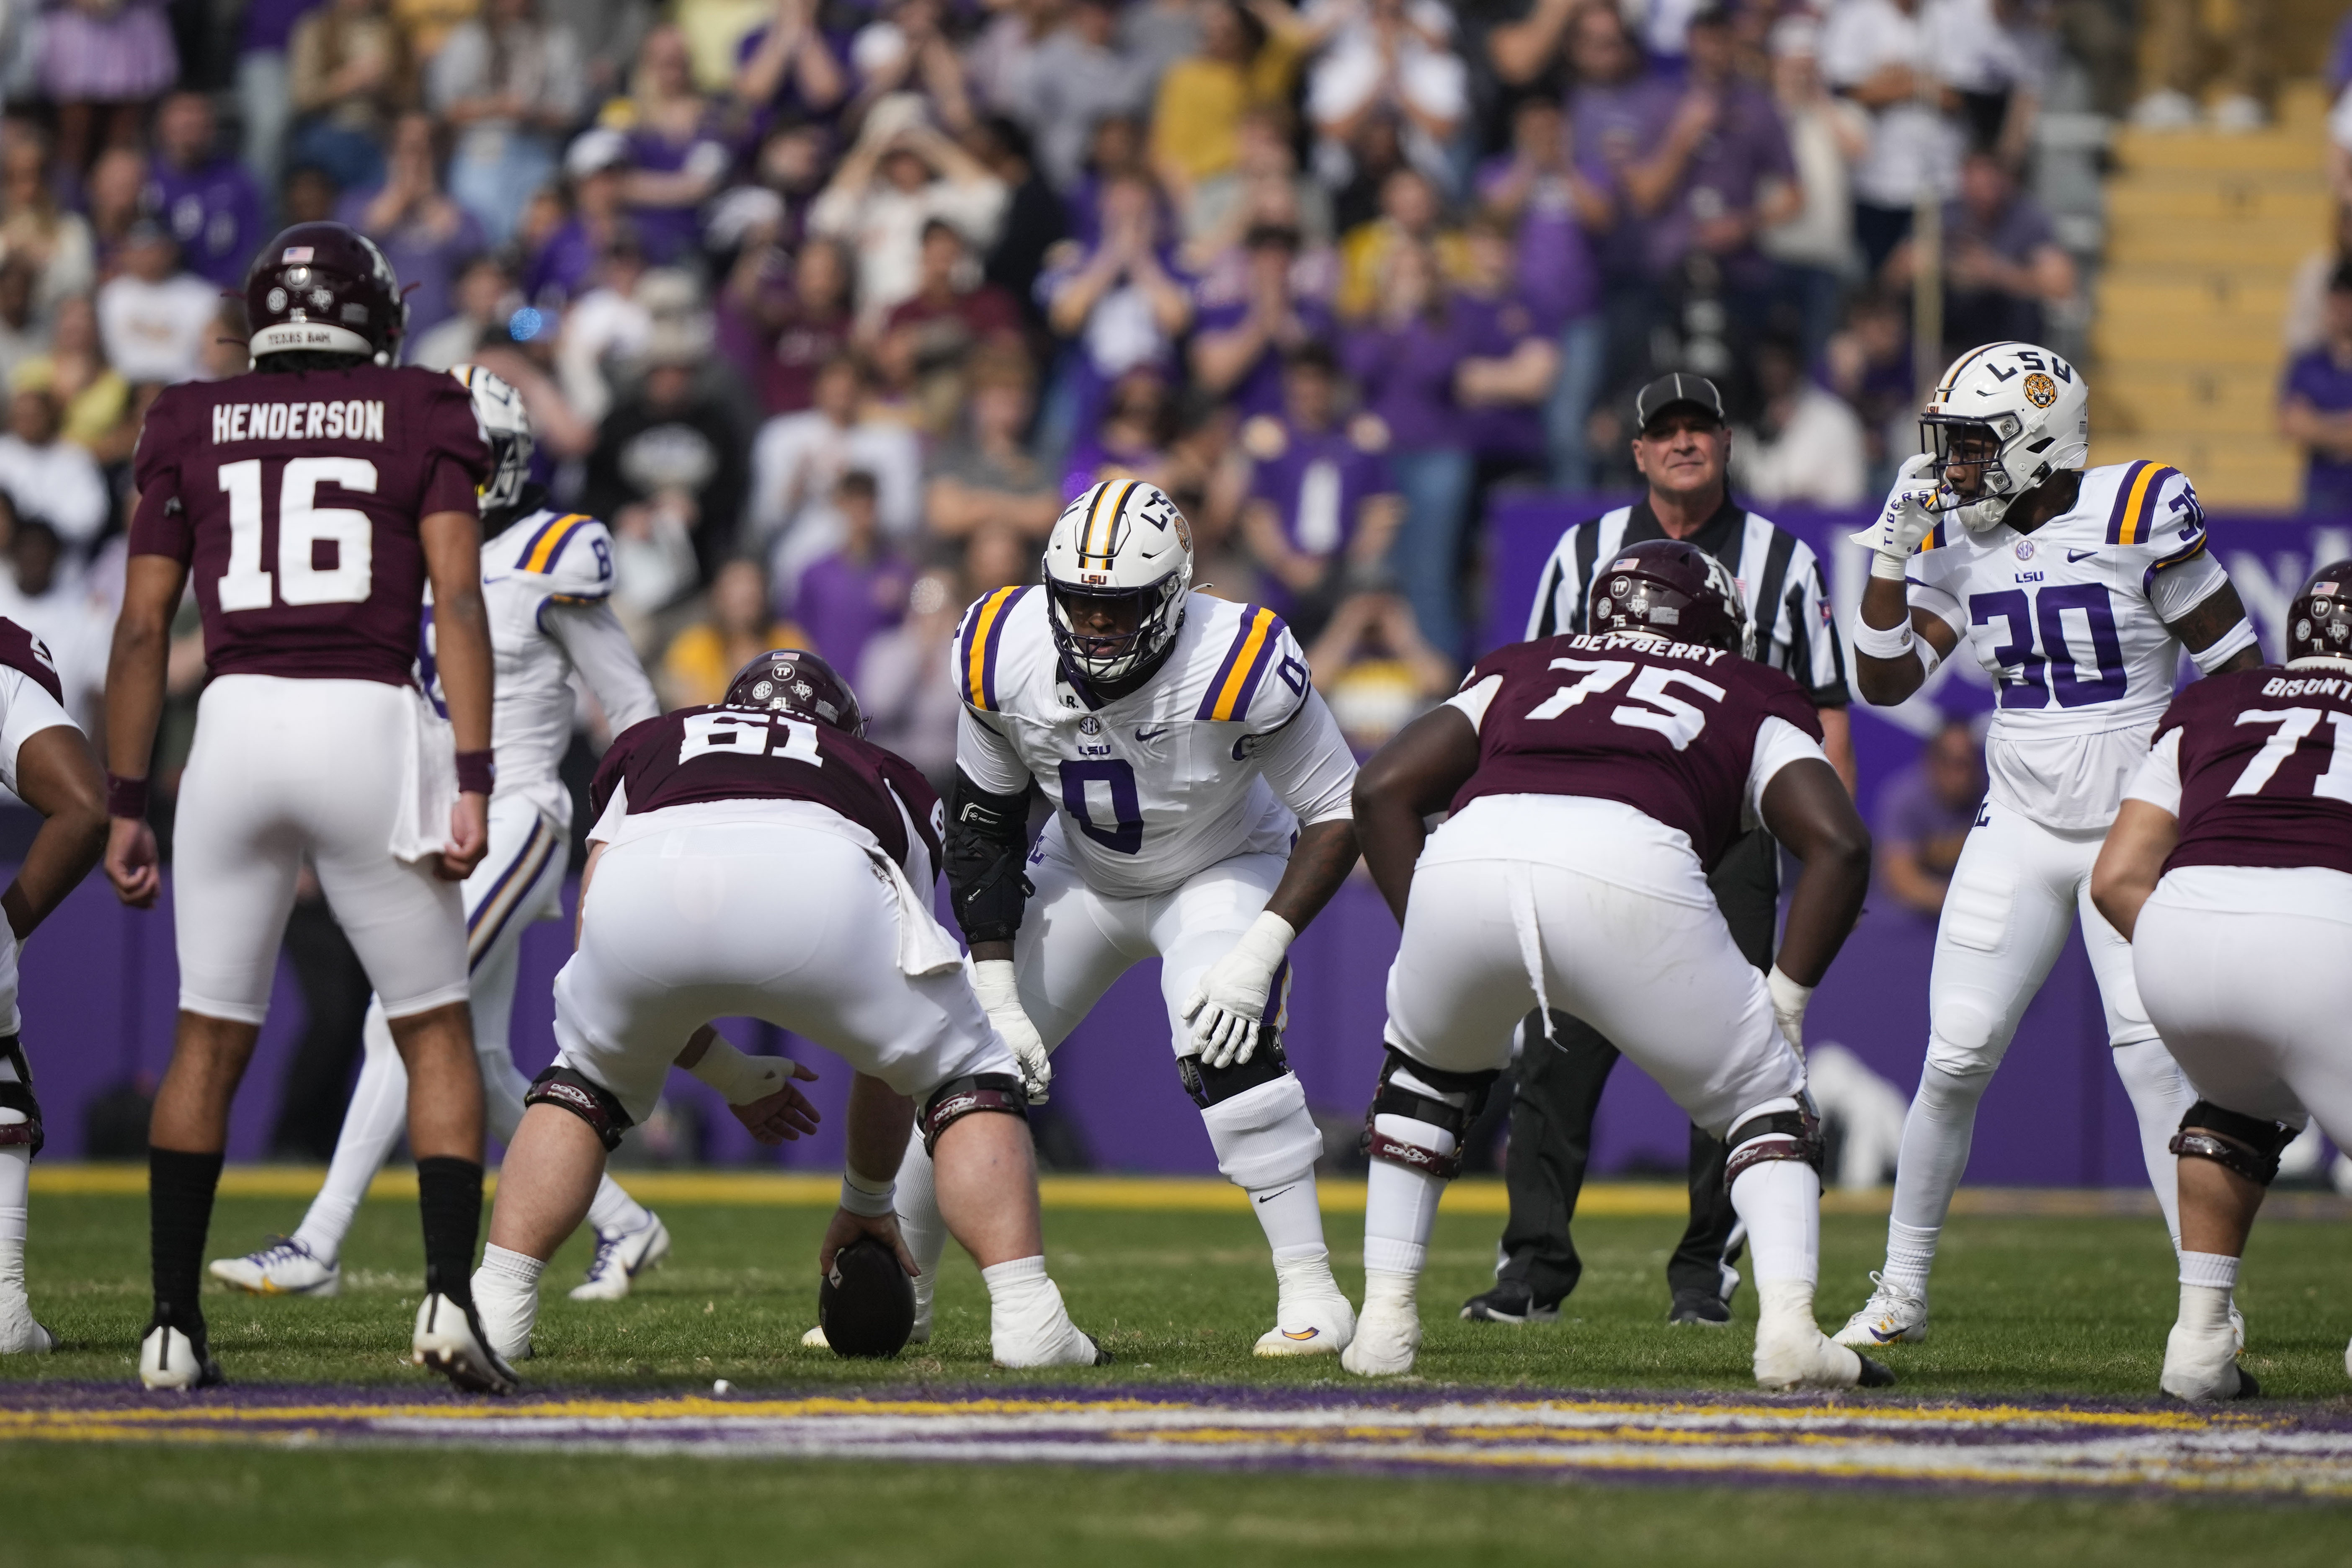 What Texas A&M fans can expect from a Collin Klein-led offense next season